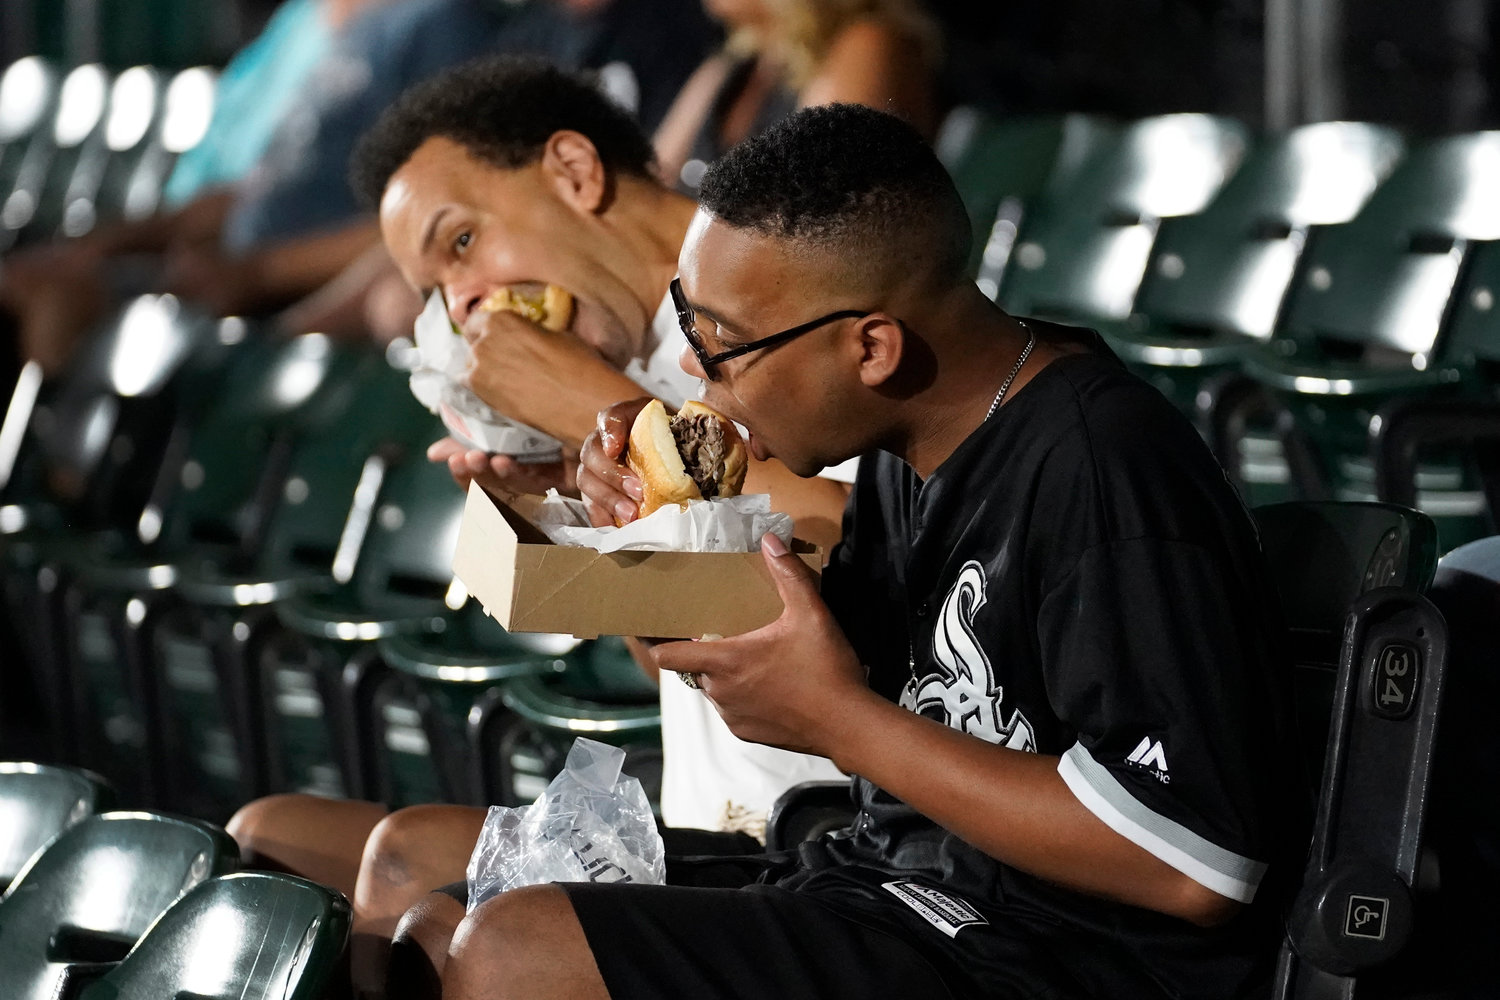 Aaron Armstead, left, and his son Alec, from Chicago, take bites out of their sandwiches before a September baseball game between the Cleveland Guardians and Chicago White Sox in Chicago. Persistently high inflation and gas prices are looming over sports and the monetary pipeline that resumed when fans returned to games amid the pandemic.